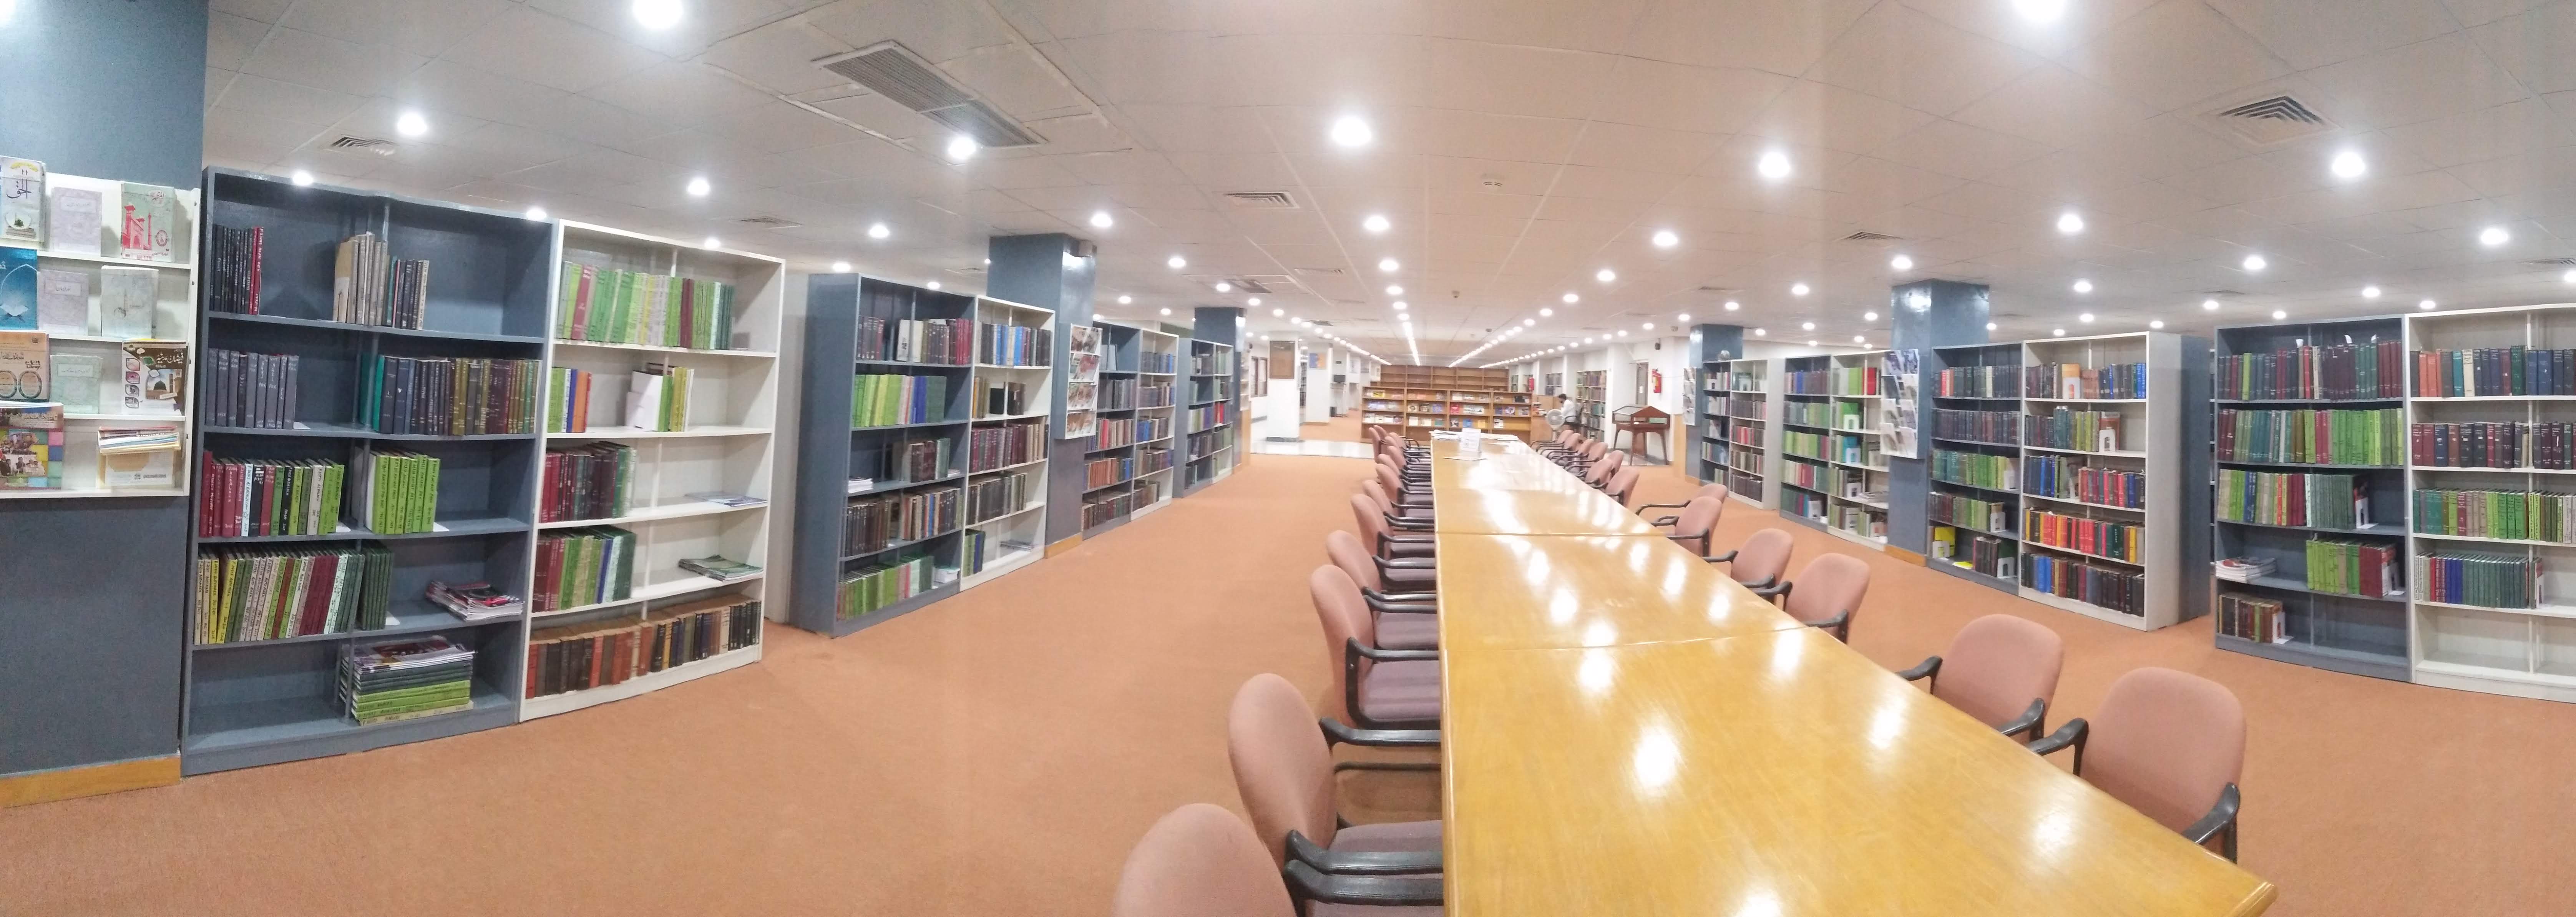 A Panoramic View of the First Floor of SBP Library